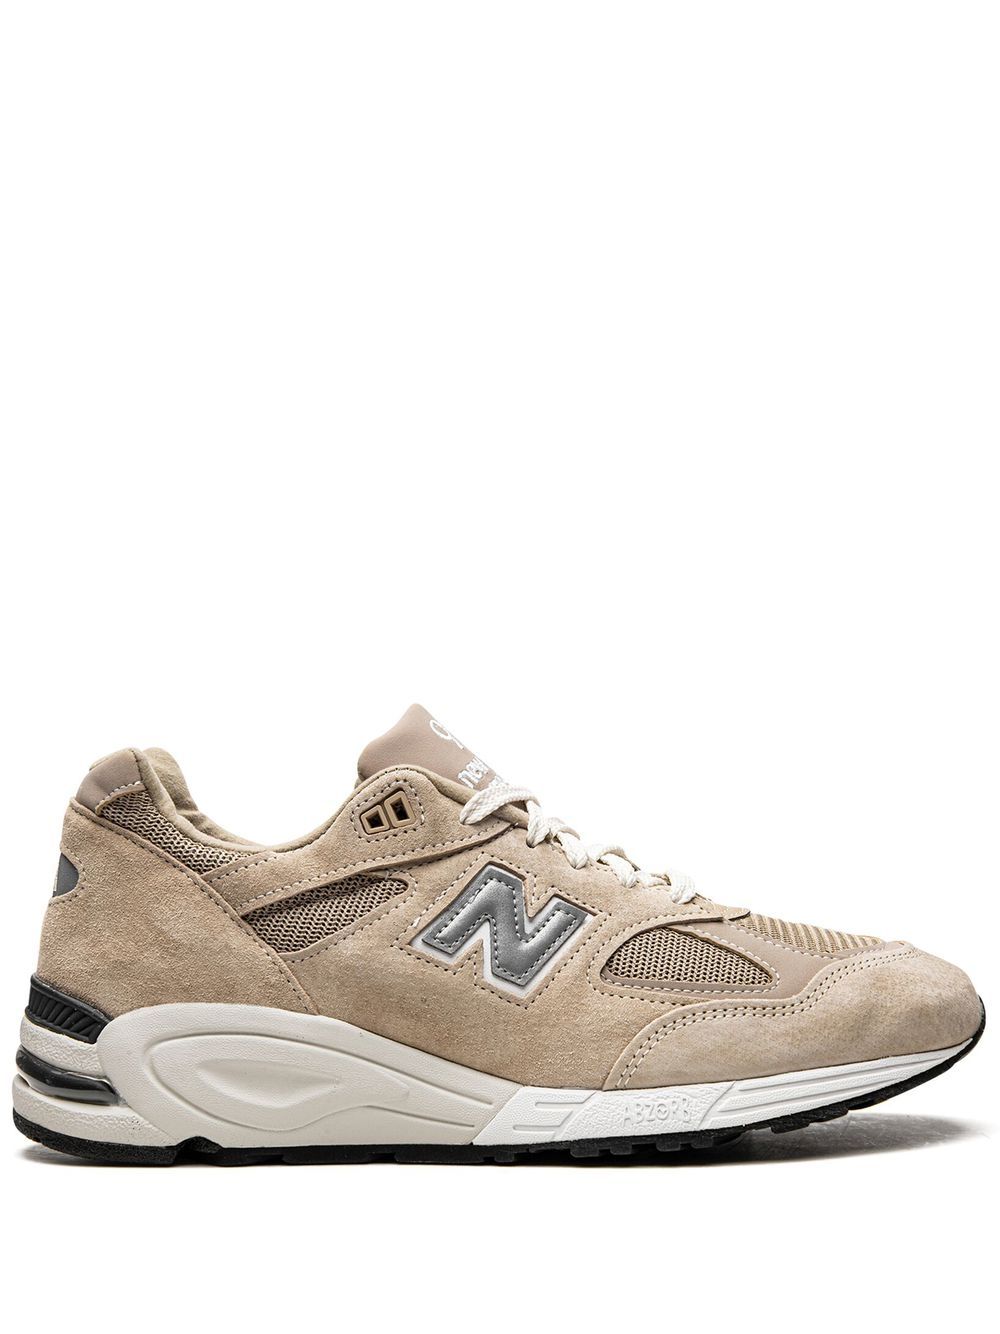 New Balance x Kith 990 V2 Made In USA "Tan" sneakers - Neutrals von New Balance